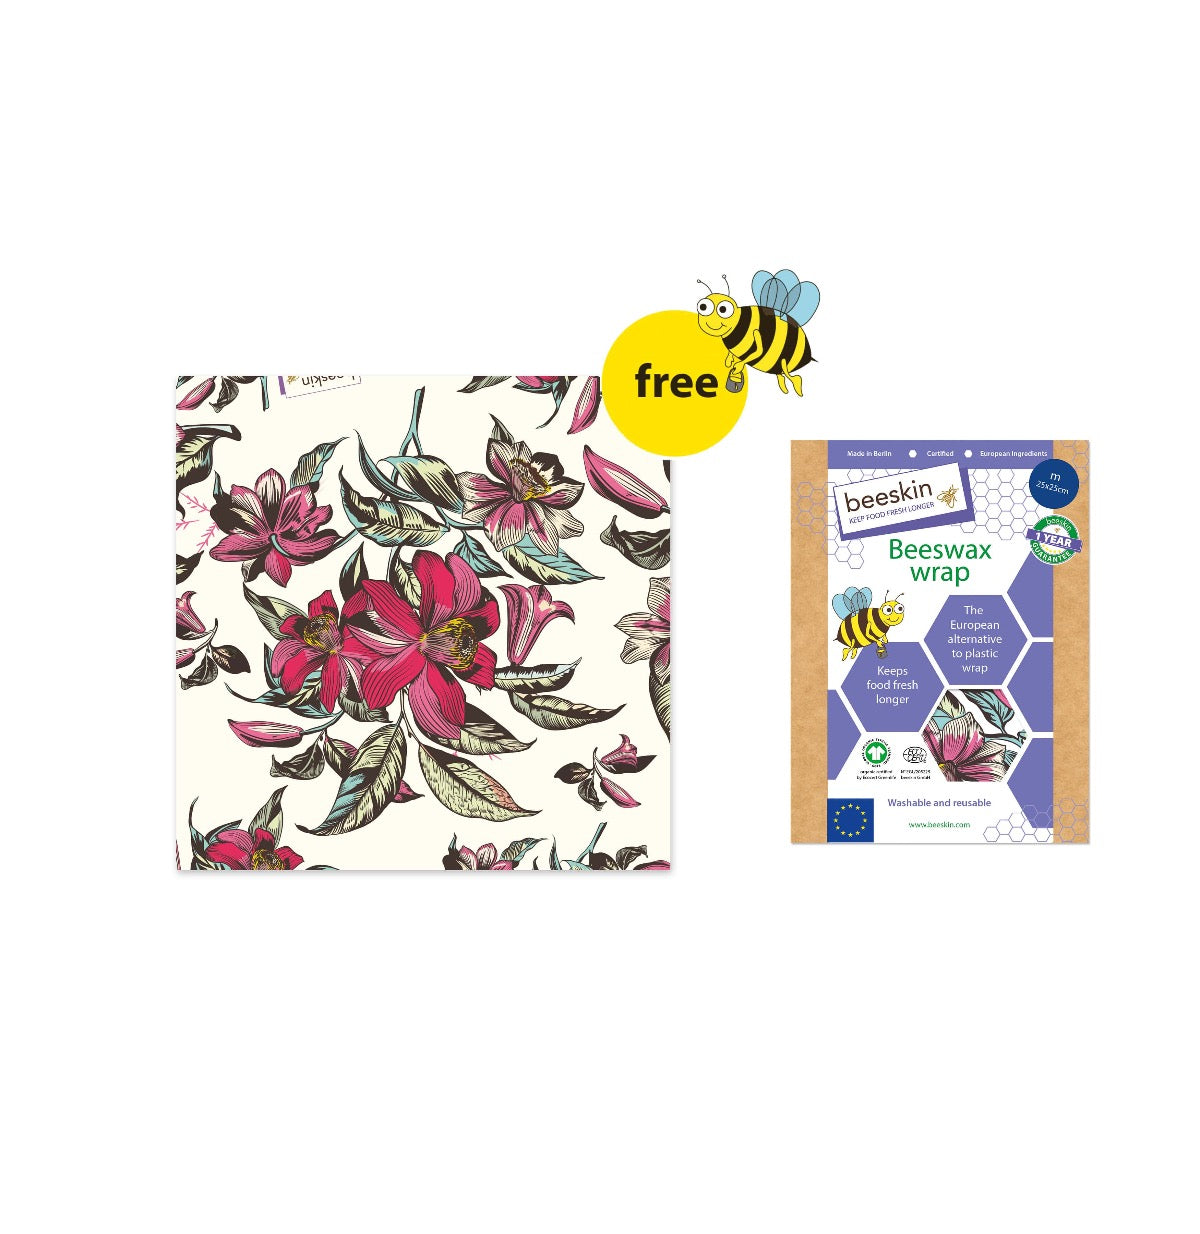 beeskin beeswax wrap victorian design and a big yellow button free with a funny bee next to packaging